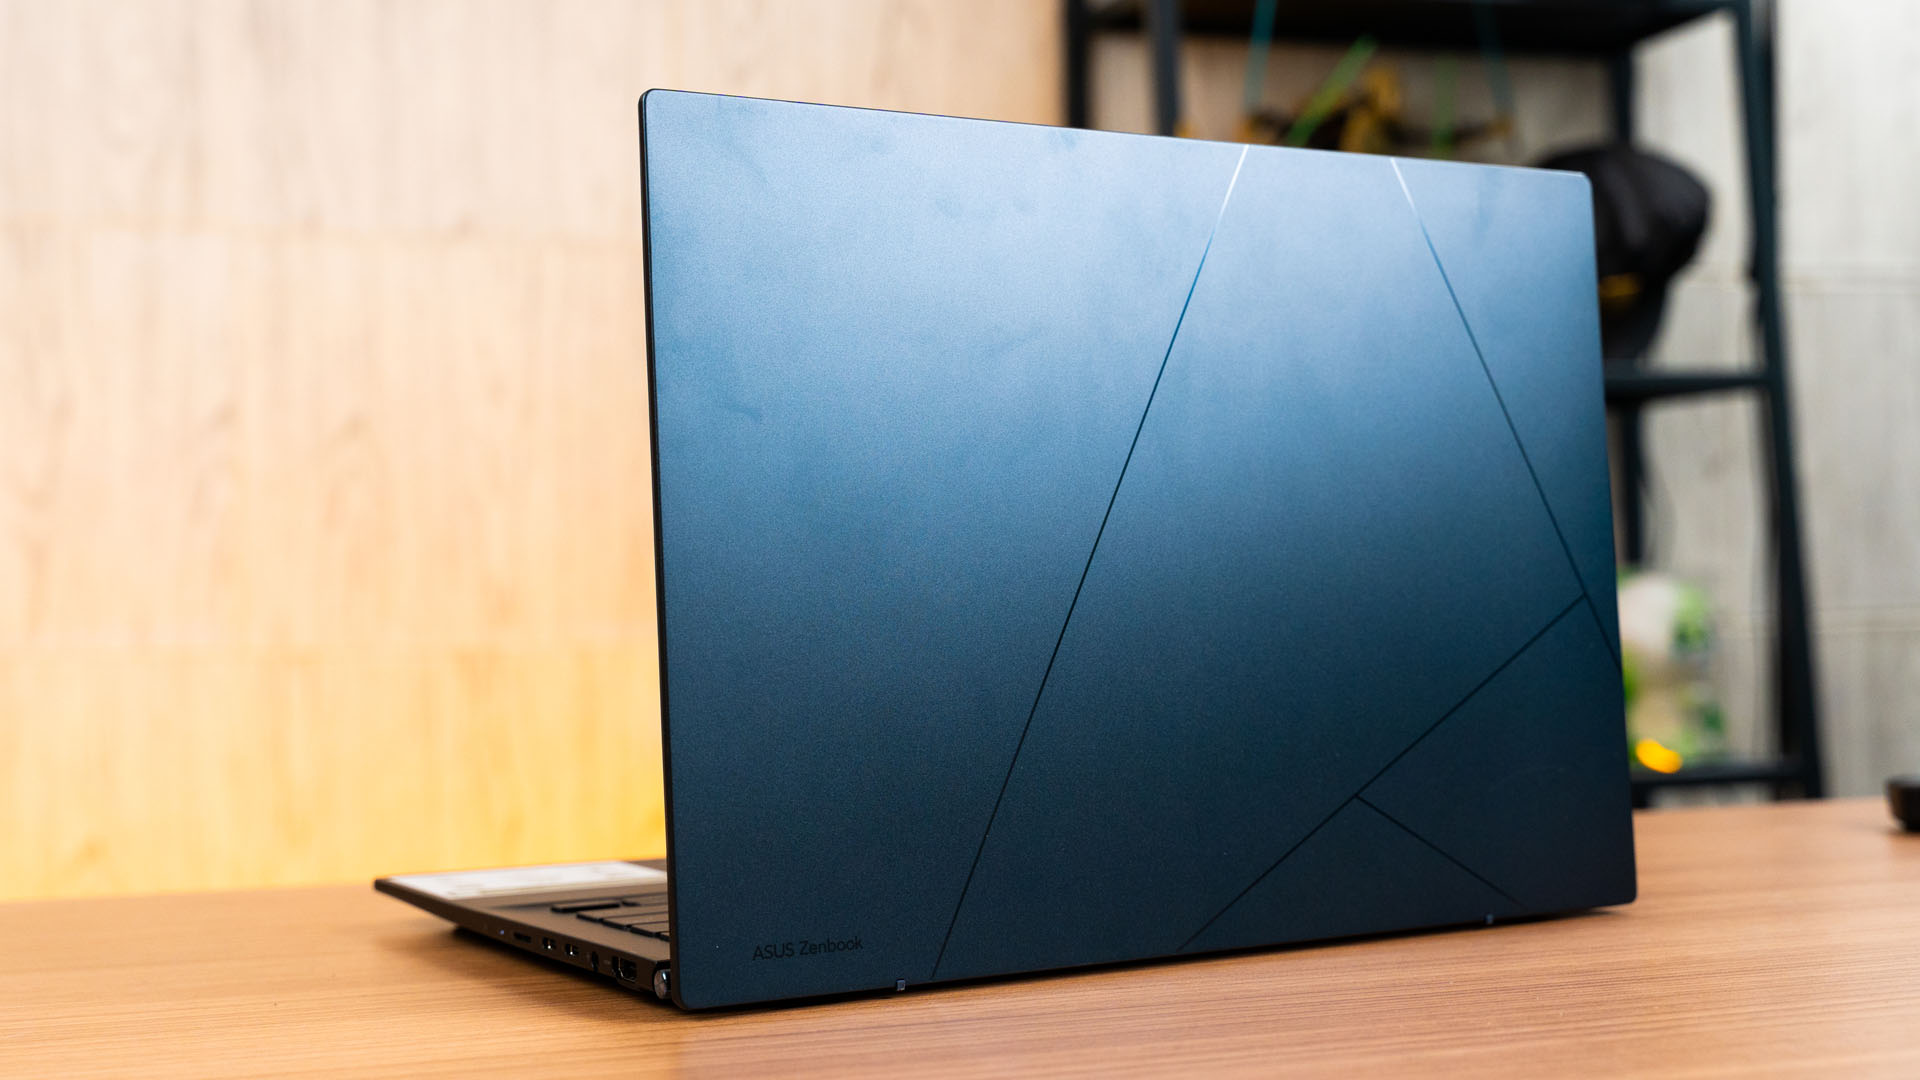 Asus Zenbook 14 OLED 2022 (UX3402ZA) Review: Optimized To The Core - Gizbot  Reviews